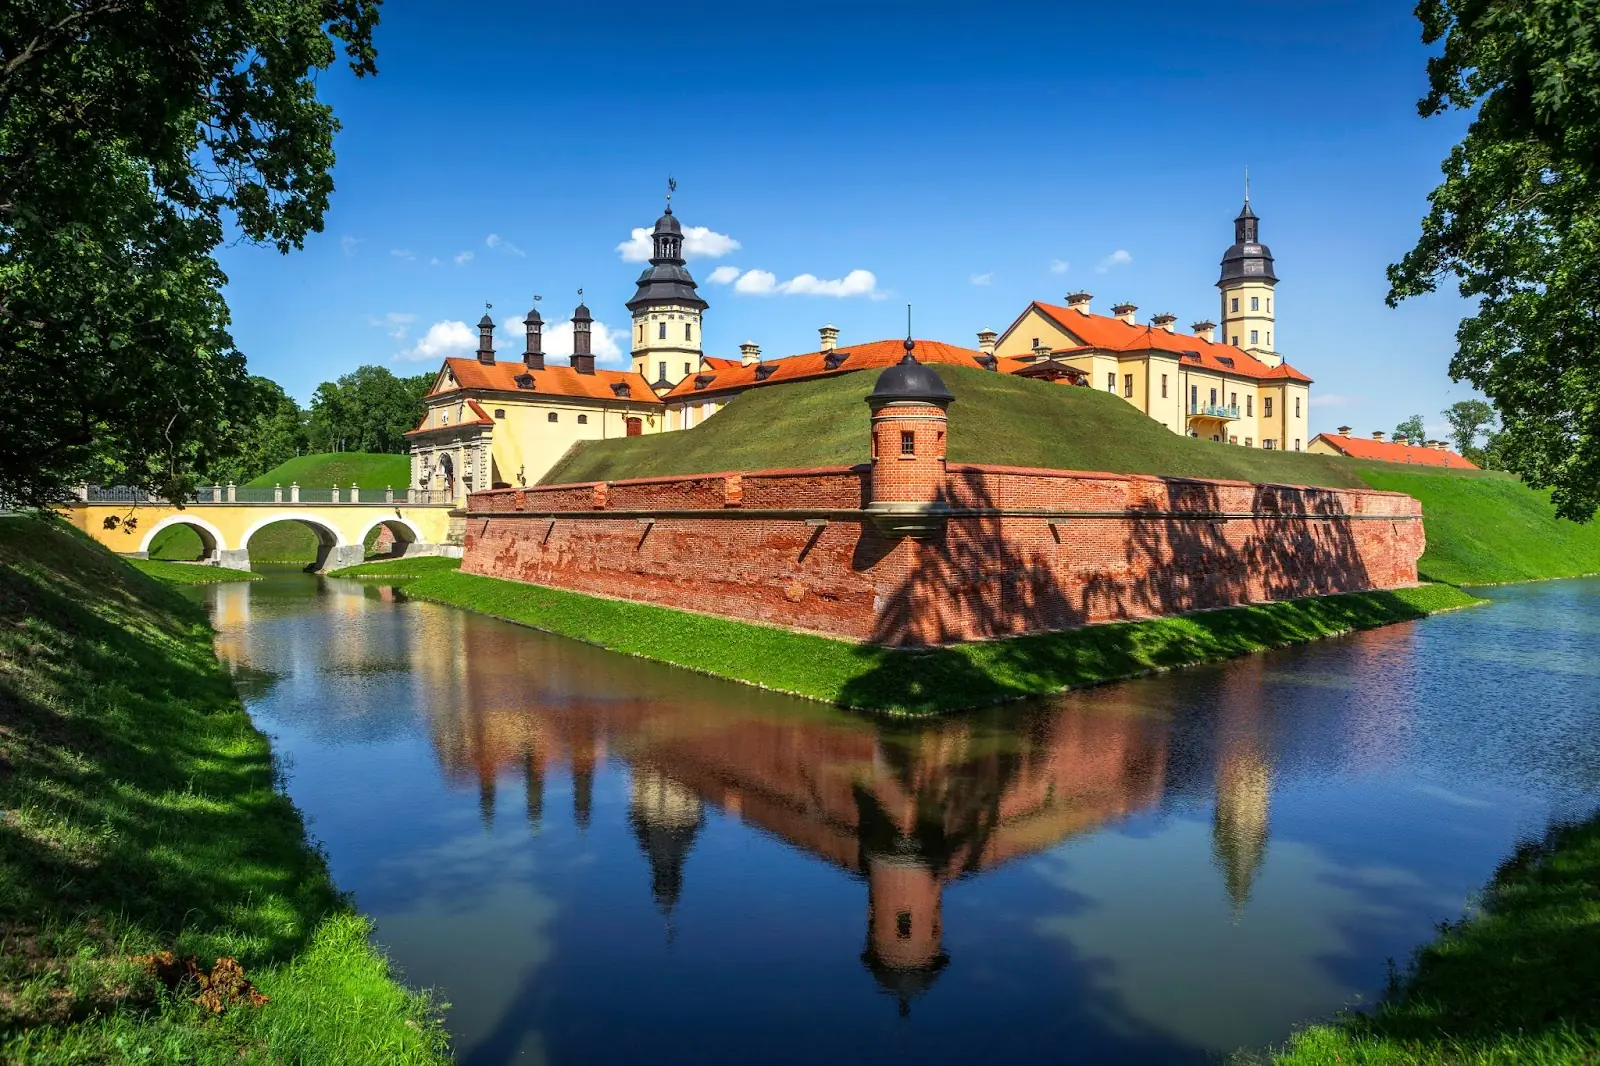 Nesvizh Castle. Belarus. Historical, palace and castle complex. Sunny summer day.